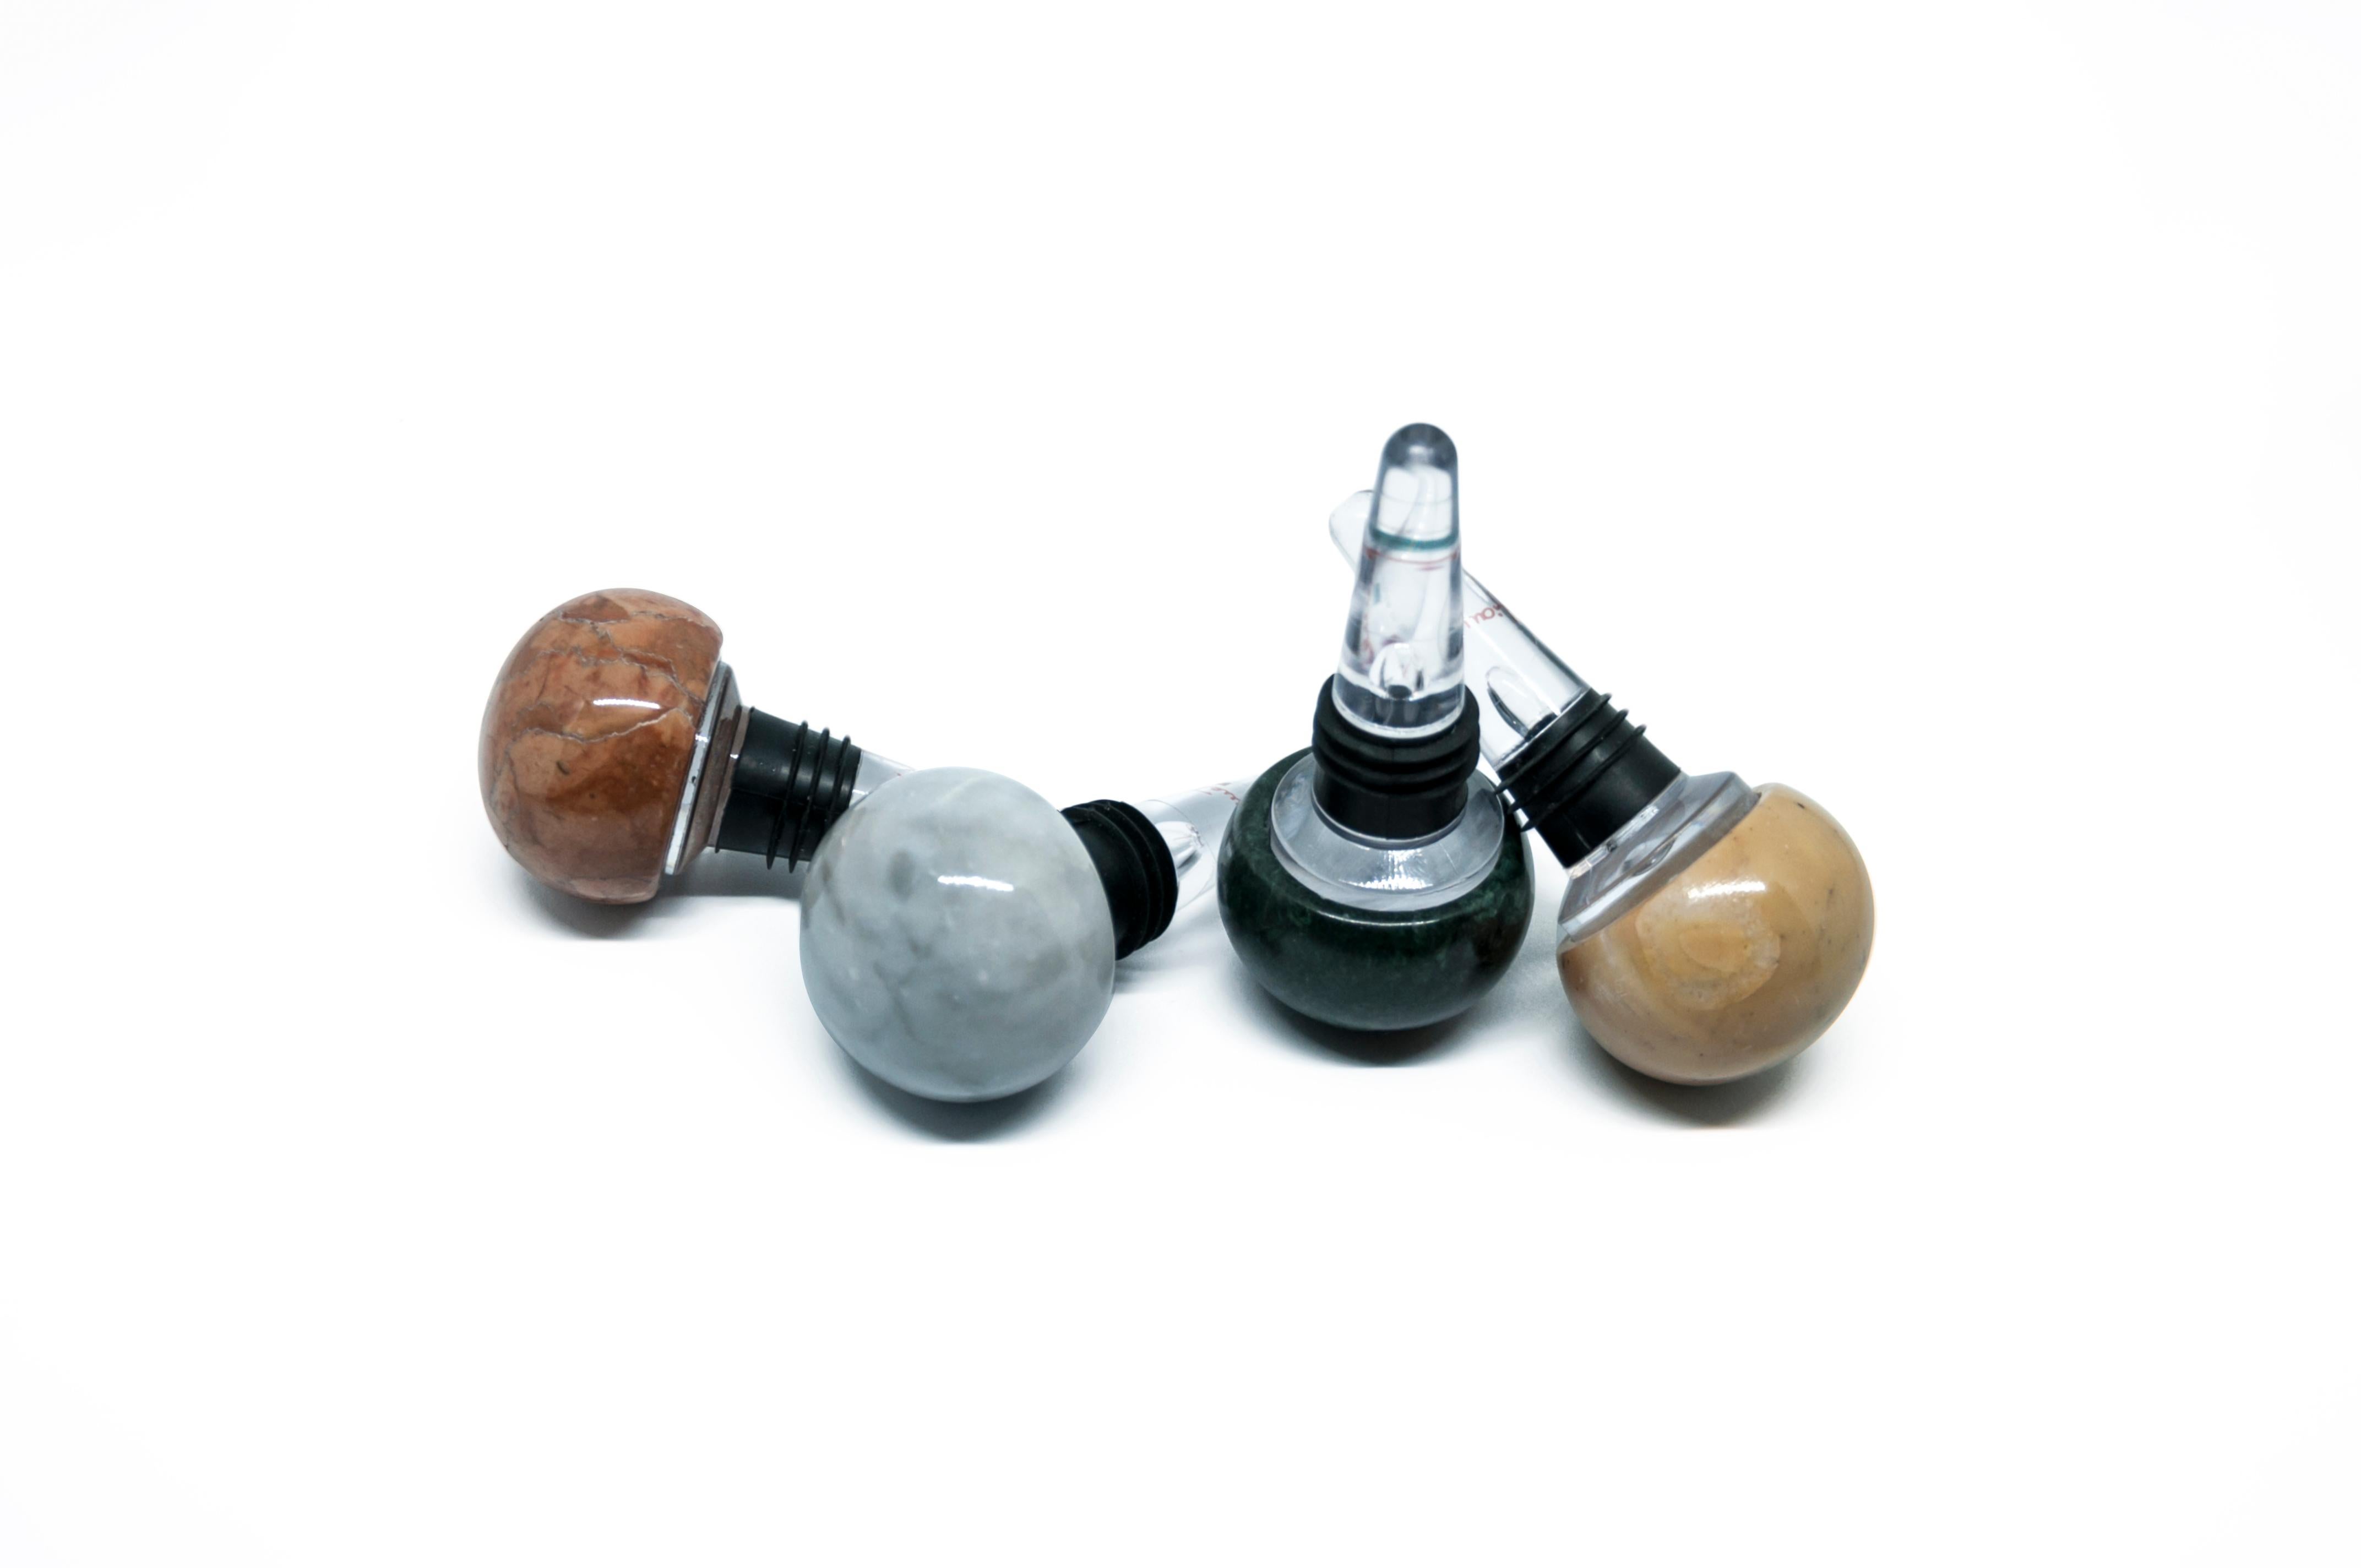 Set of 4 bottle stoppers in mixed marble colors and plexiglass, ideal for Champagne glass bottles.

Each piece is in a way unique (since each marble block is different in veins and shades) and handcrafted in Italy. Slight variations in shape, color